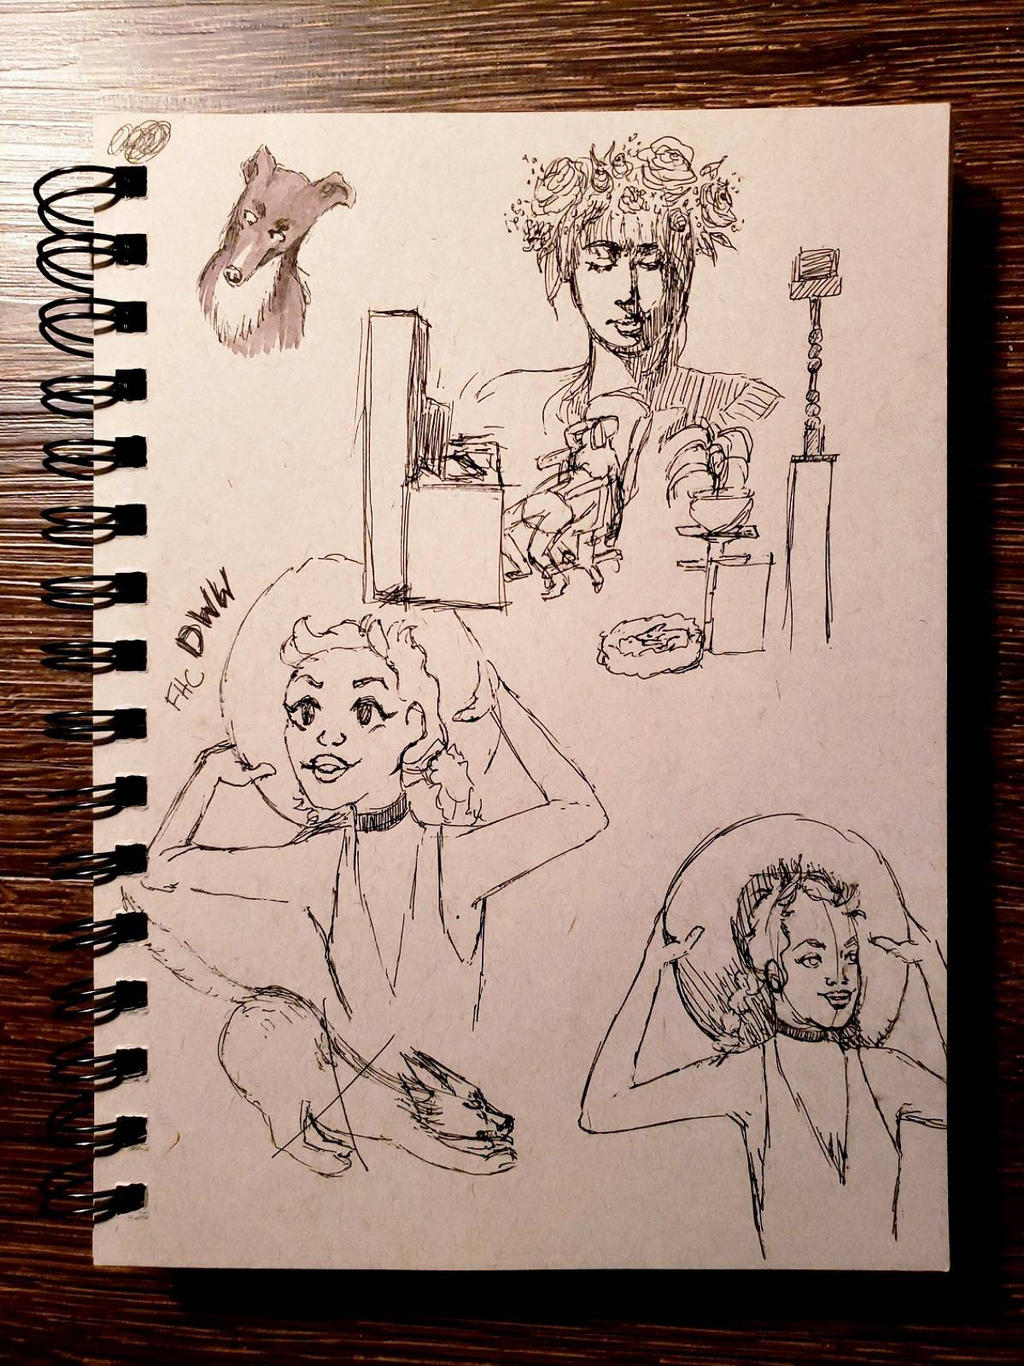 2018-2019 Toned Gray Sketchbook Page 7 by AmandaYauch on DeviantArt